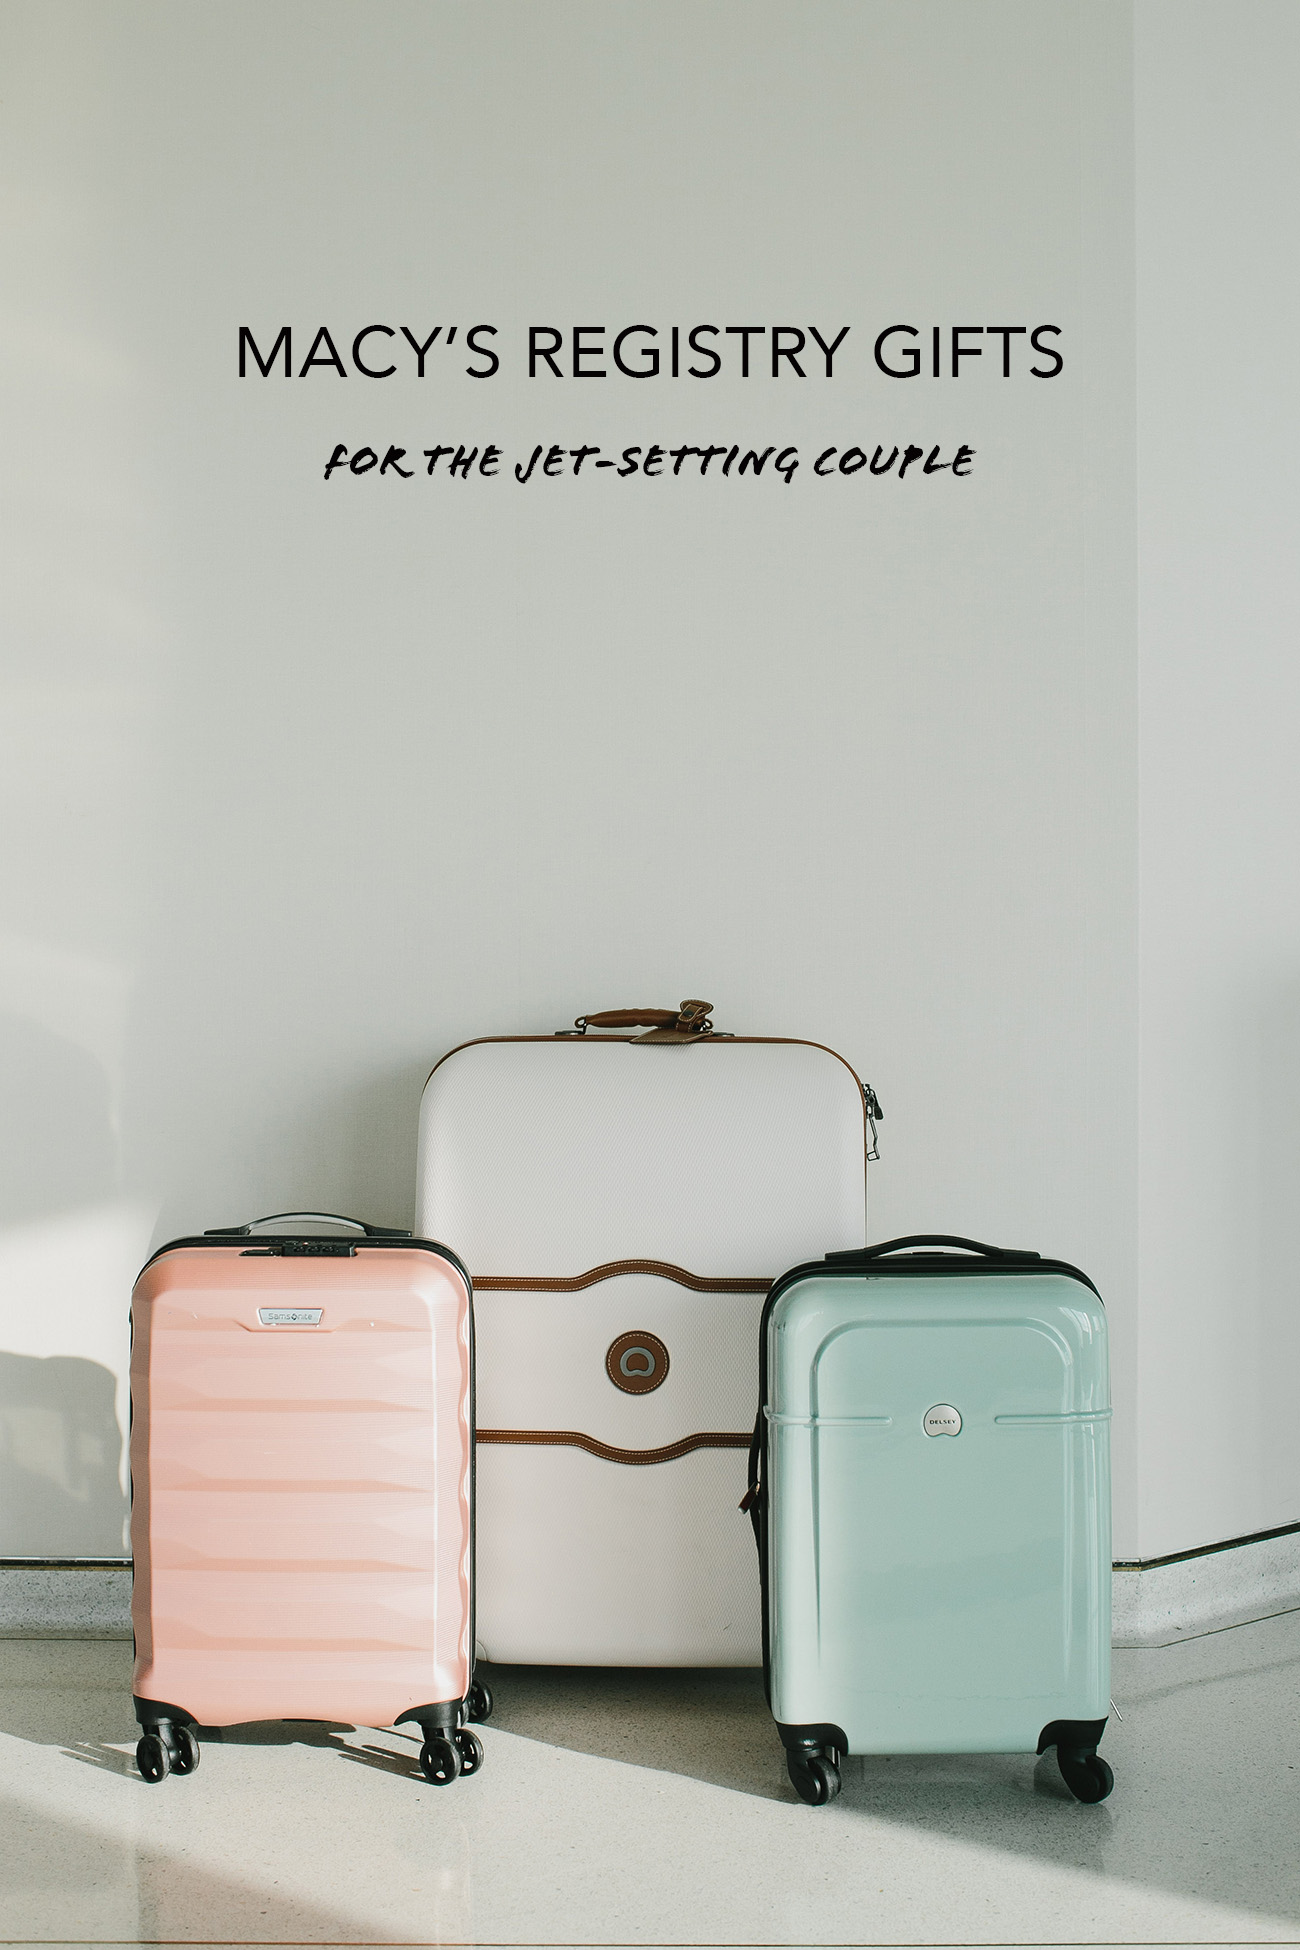 Macys Registry Gifts for the Jet-Setting Couple